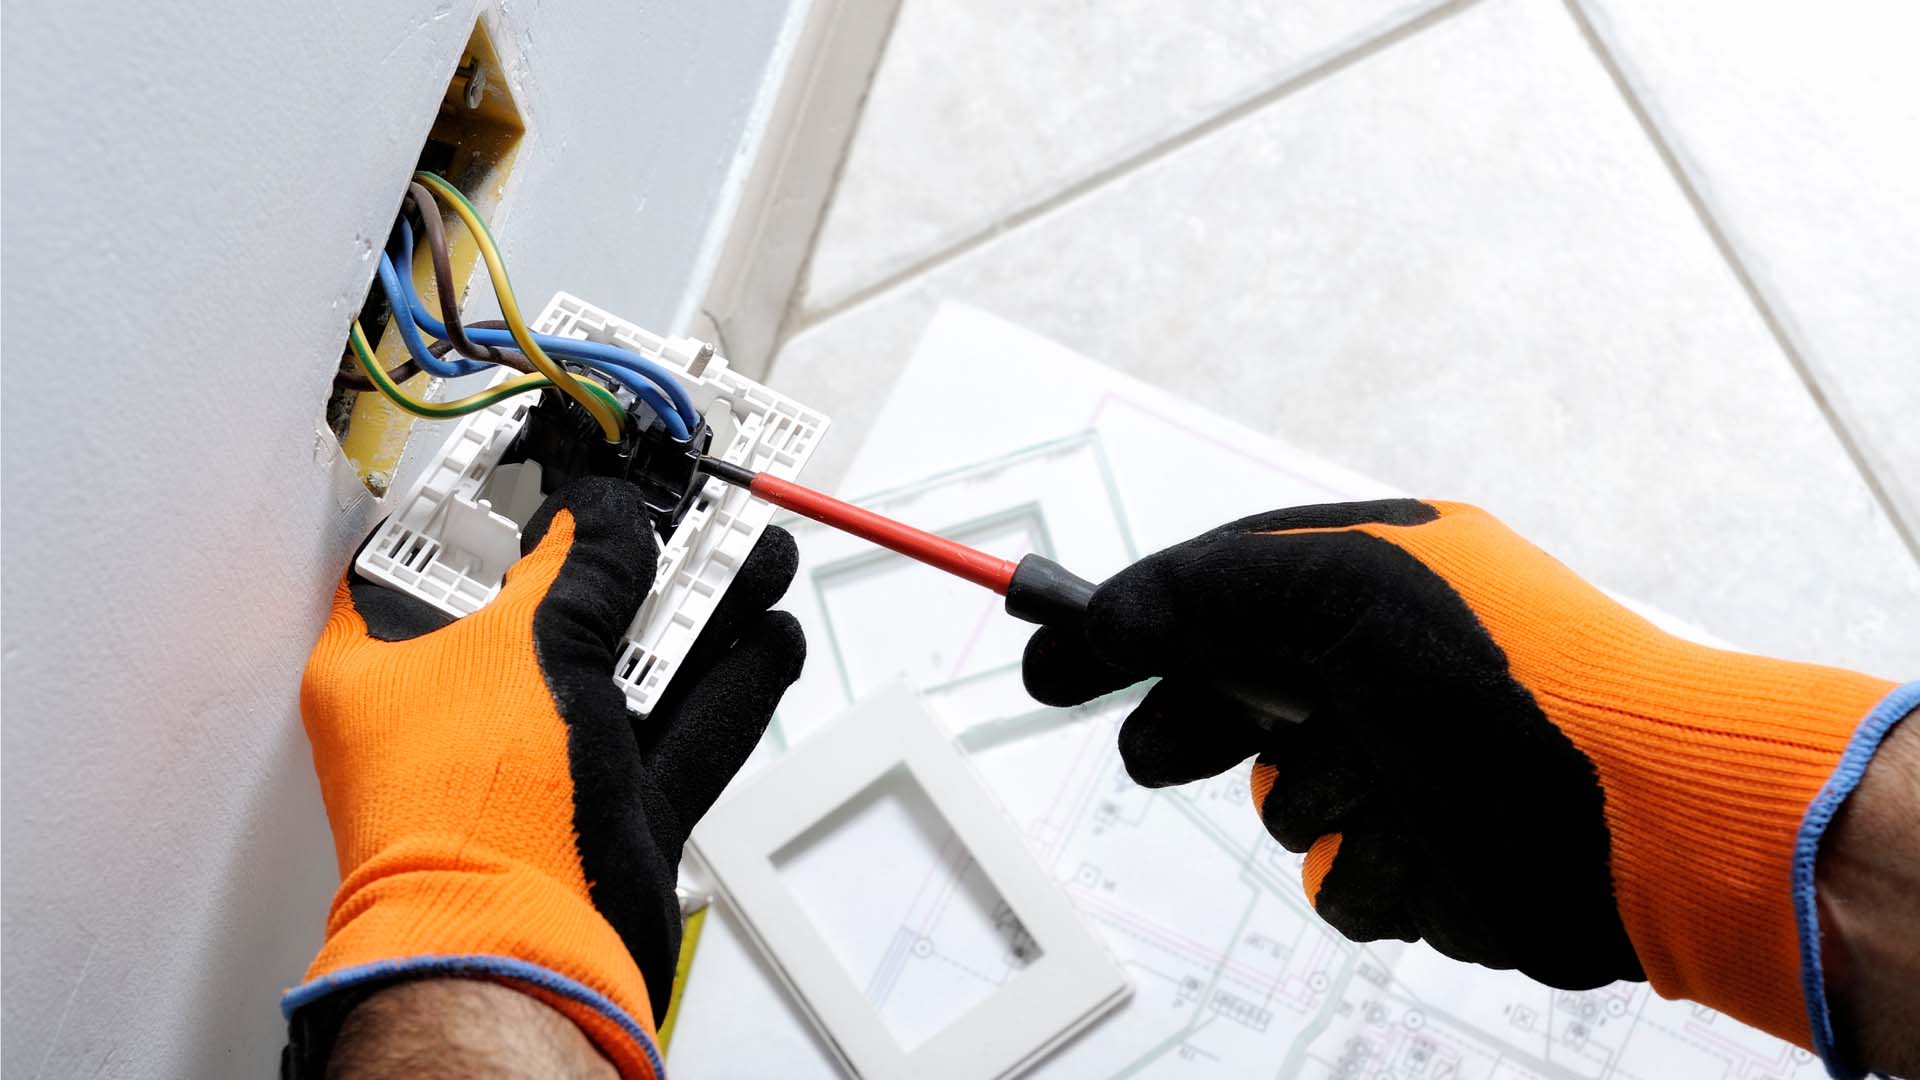 A person wearing gloves working on the electrics of a socket